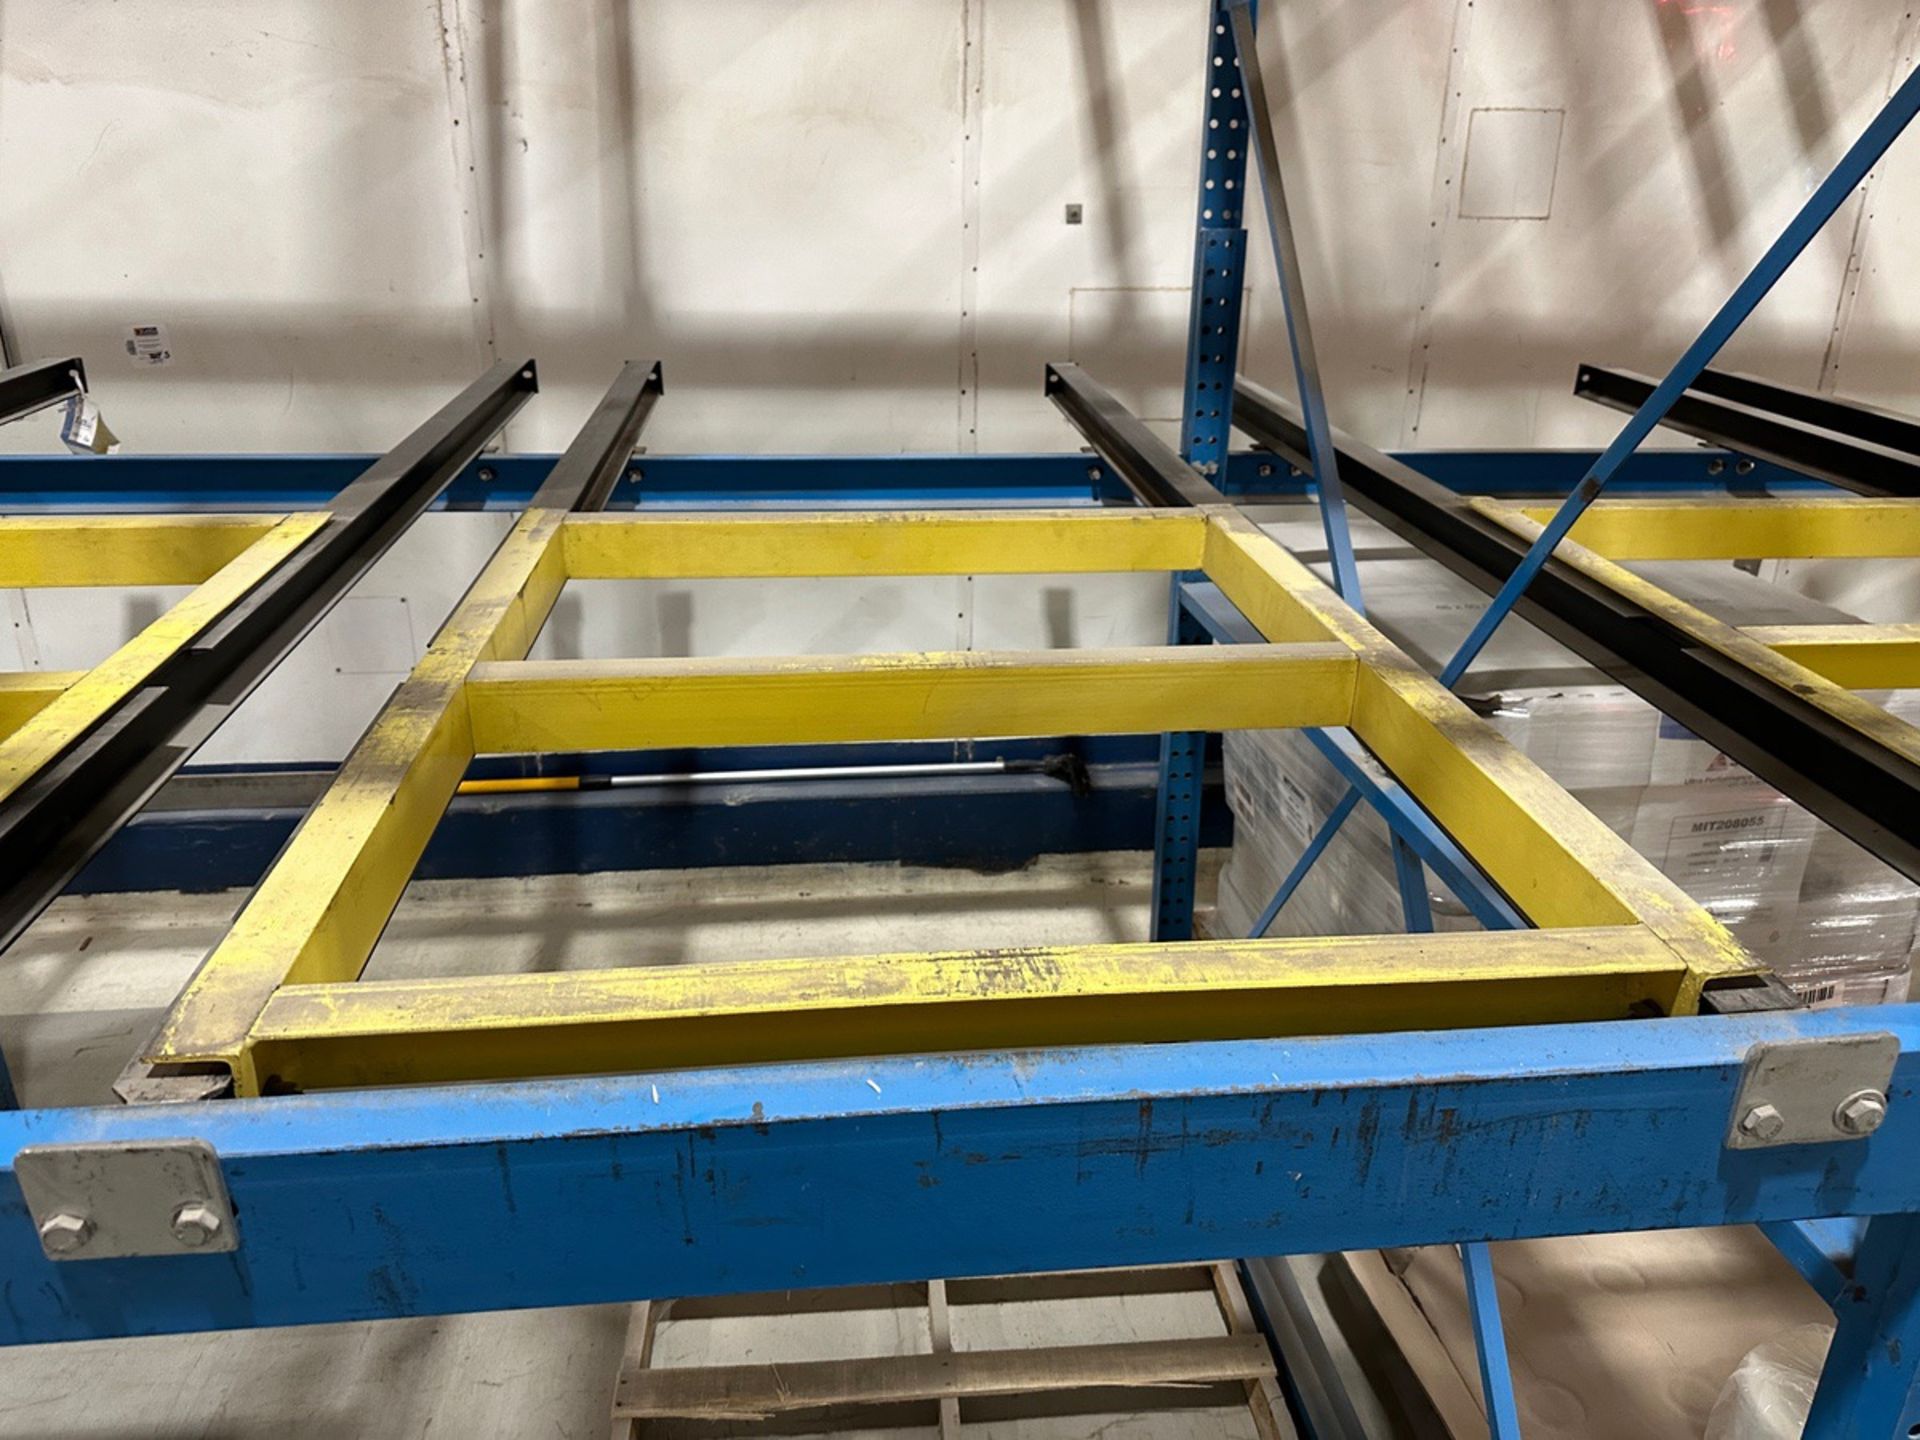 Lot of Gravity Fed Pallet Racking - (13) 15' x 78" Uprights (2 Deep), | Rig Fee $2750 See Desc - Image 5 of 5